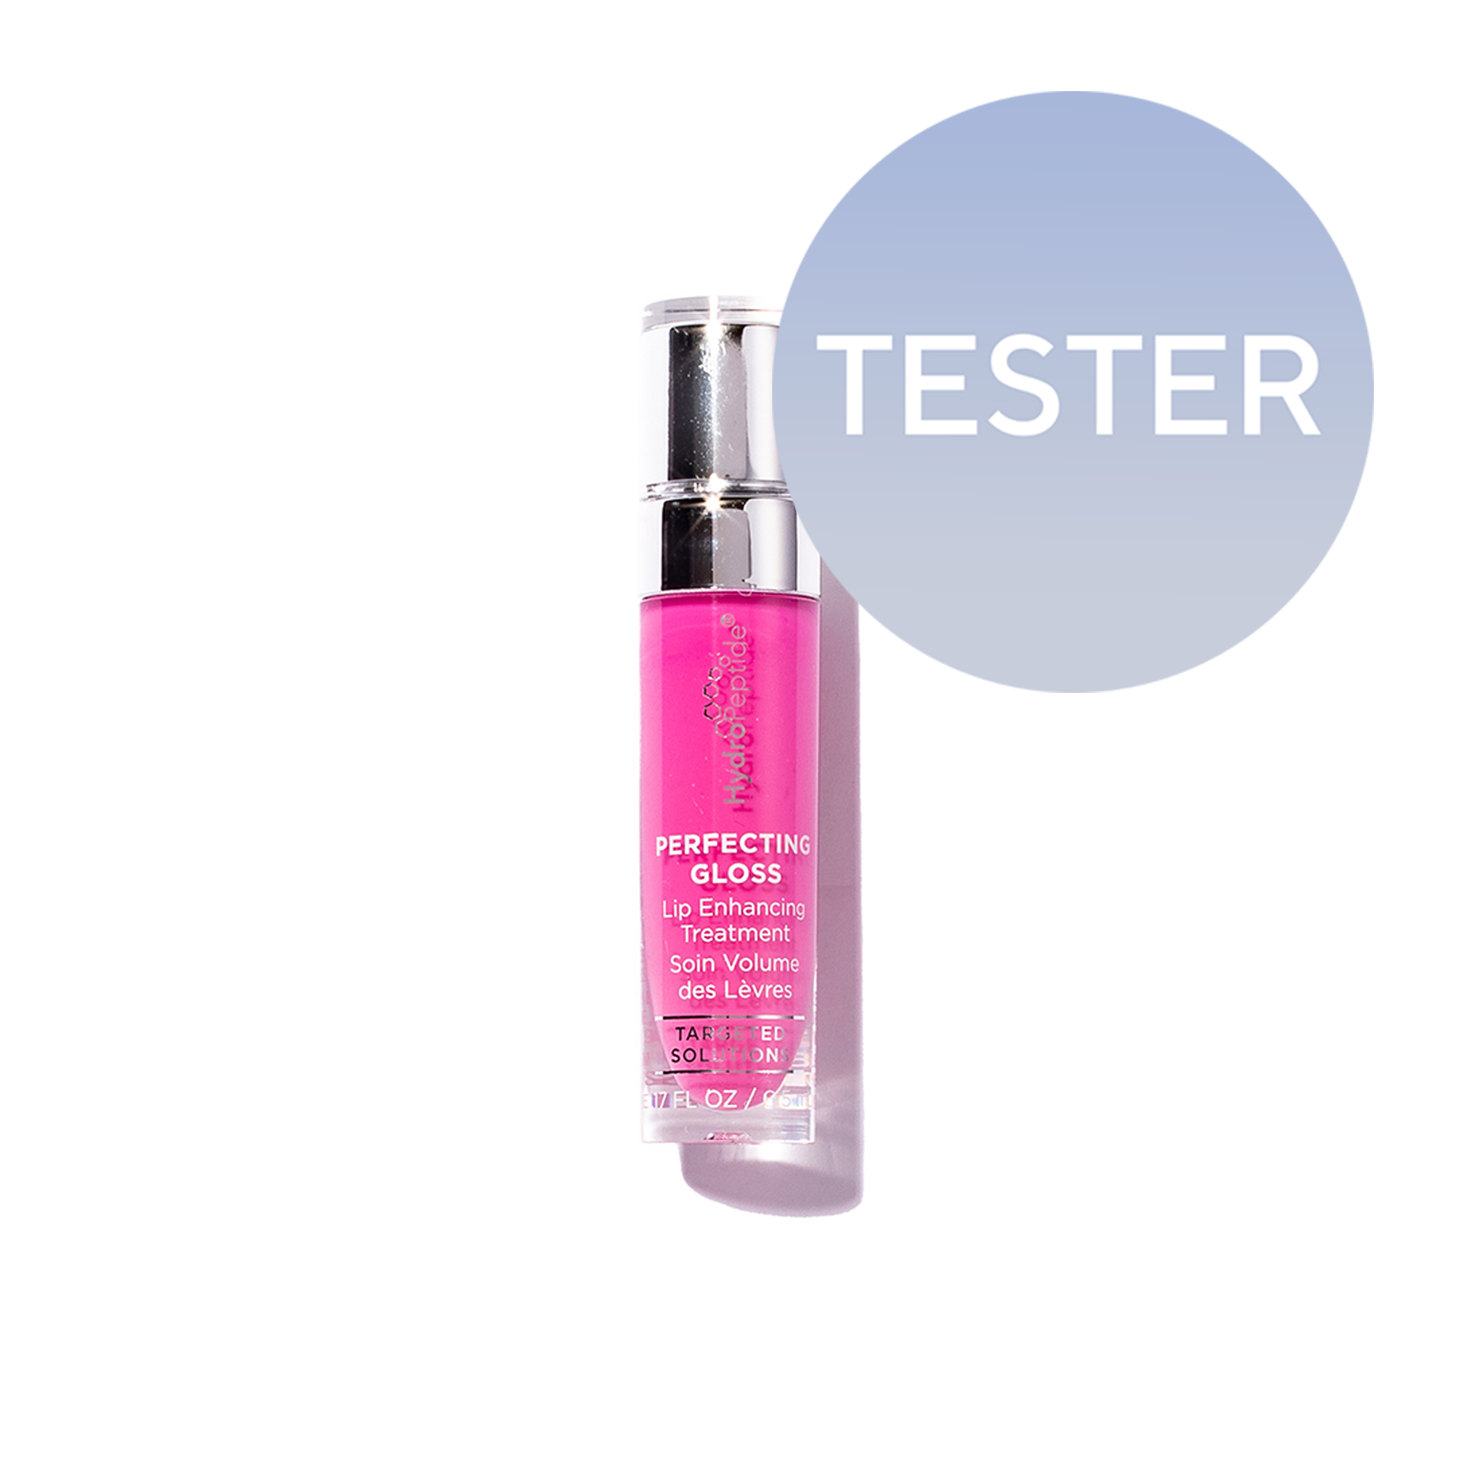 Perfecting Gloss - Palm Springs (Tester)